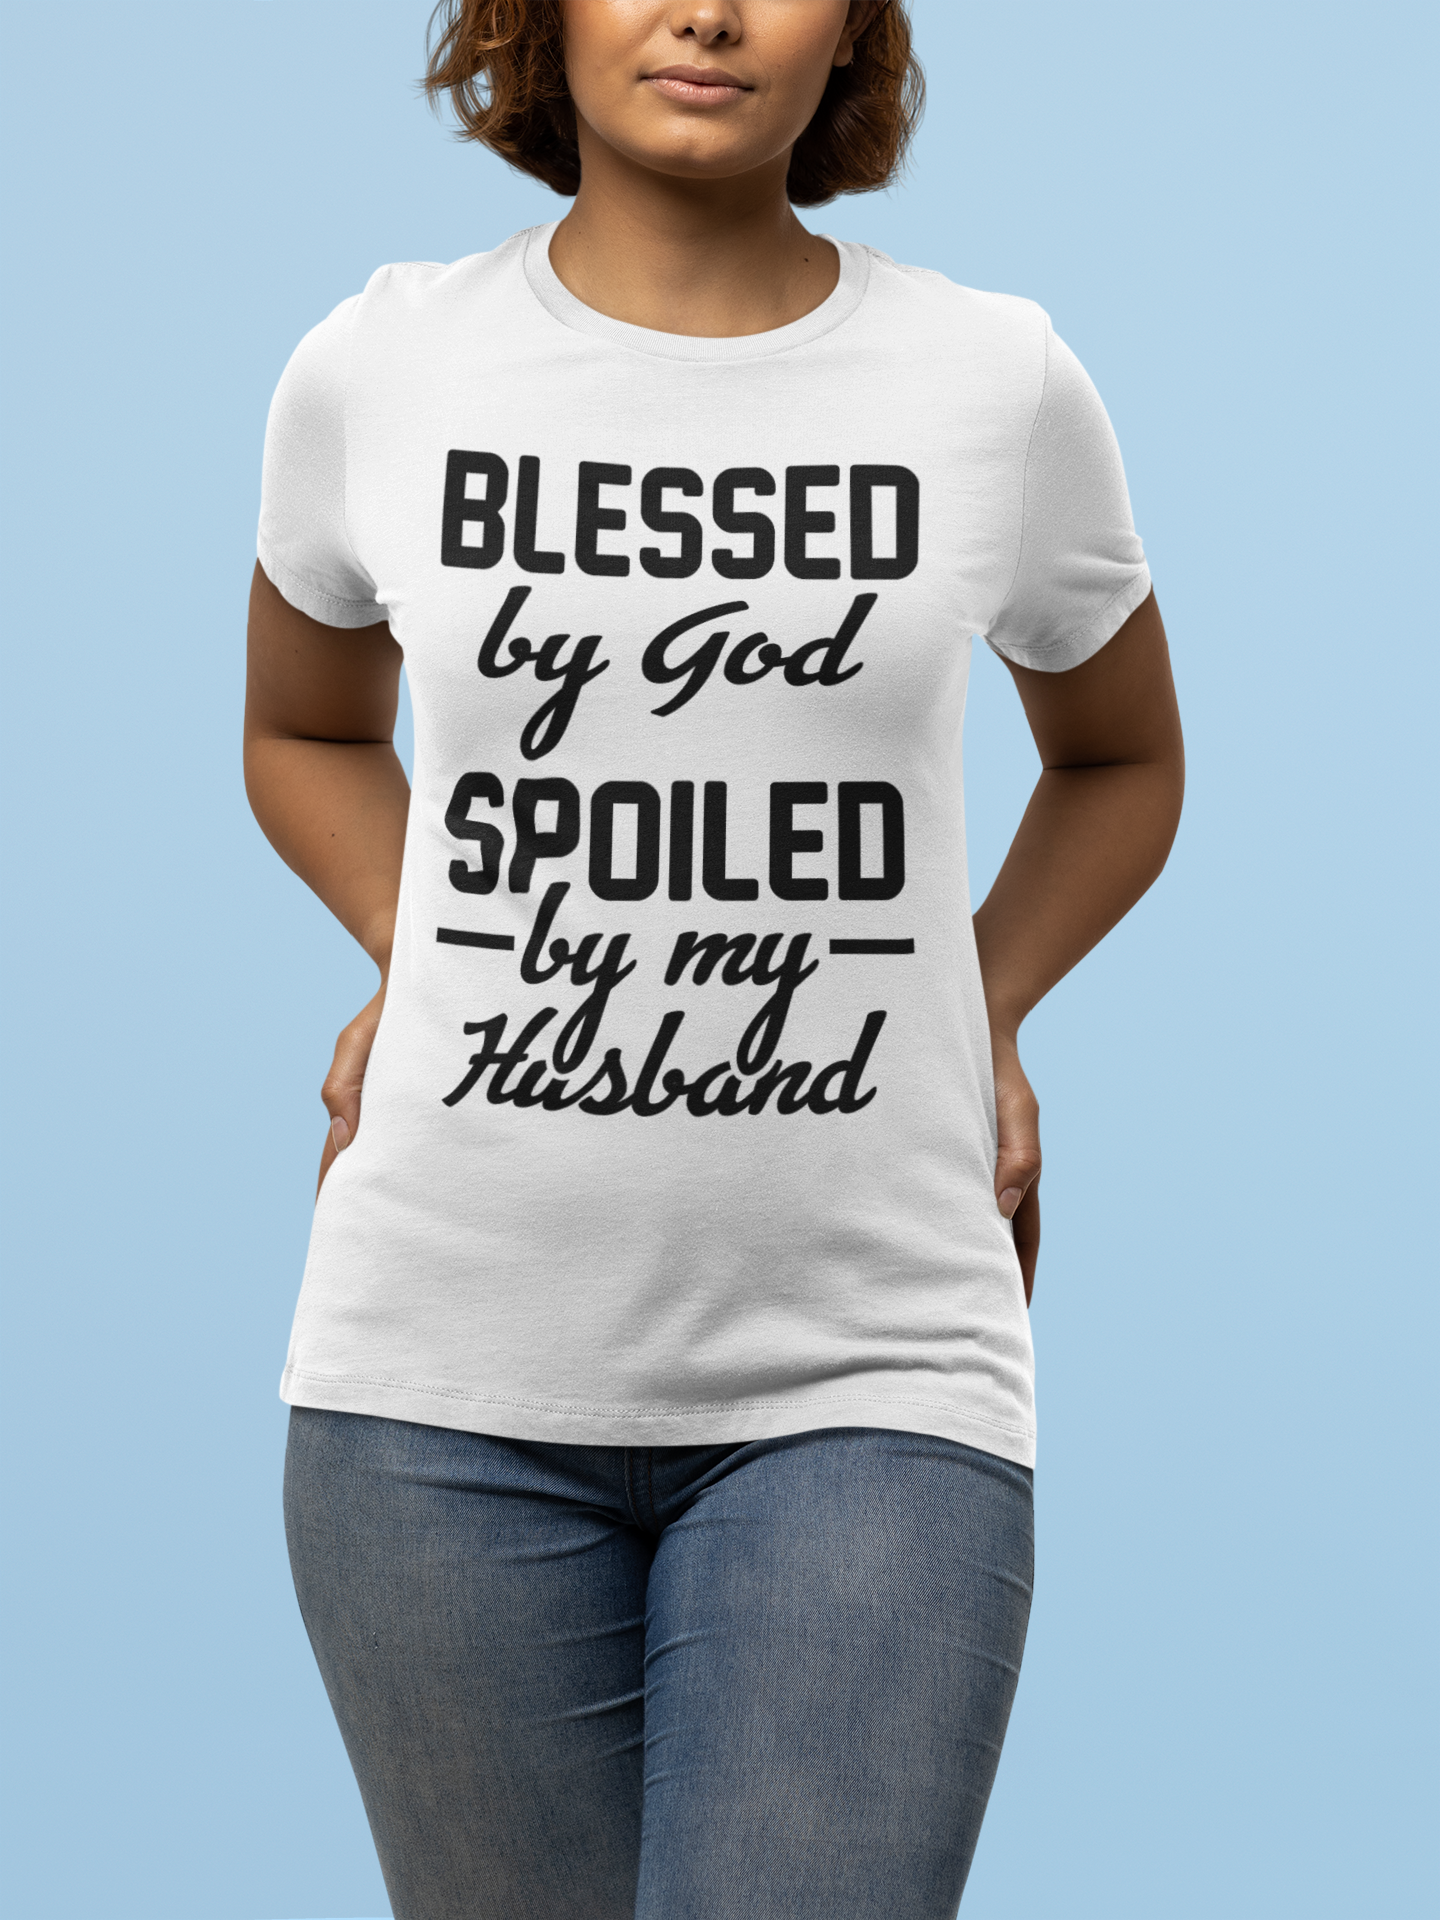 Christian, Blessed by God Spoiled By My Husband Tees, Christian Gift, Christian Shirt